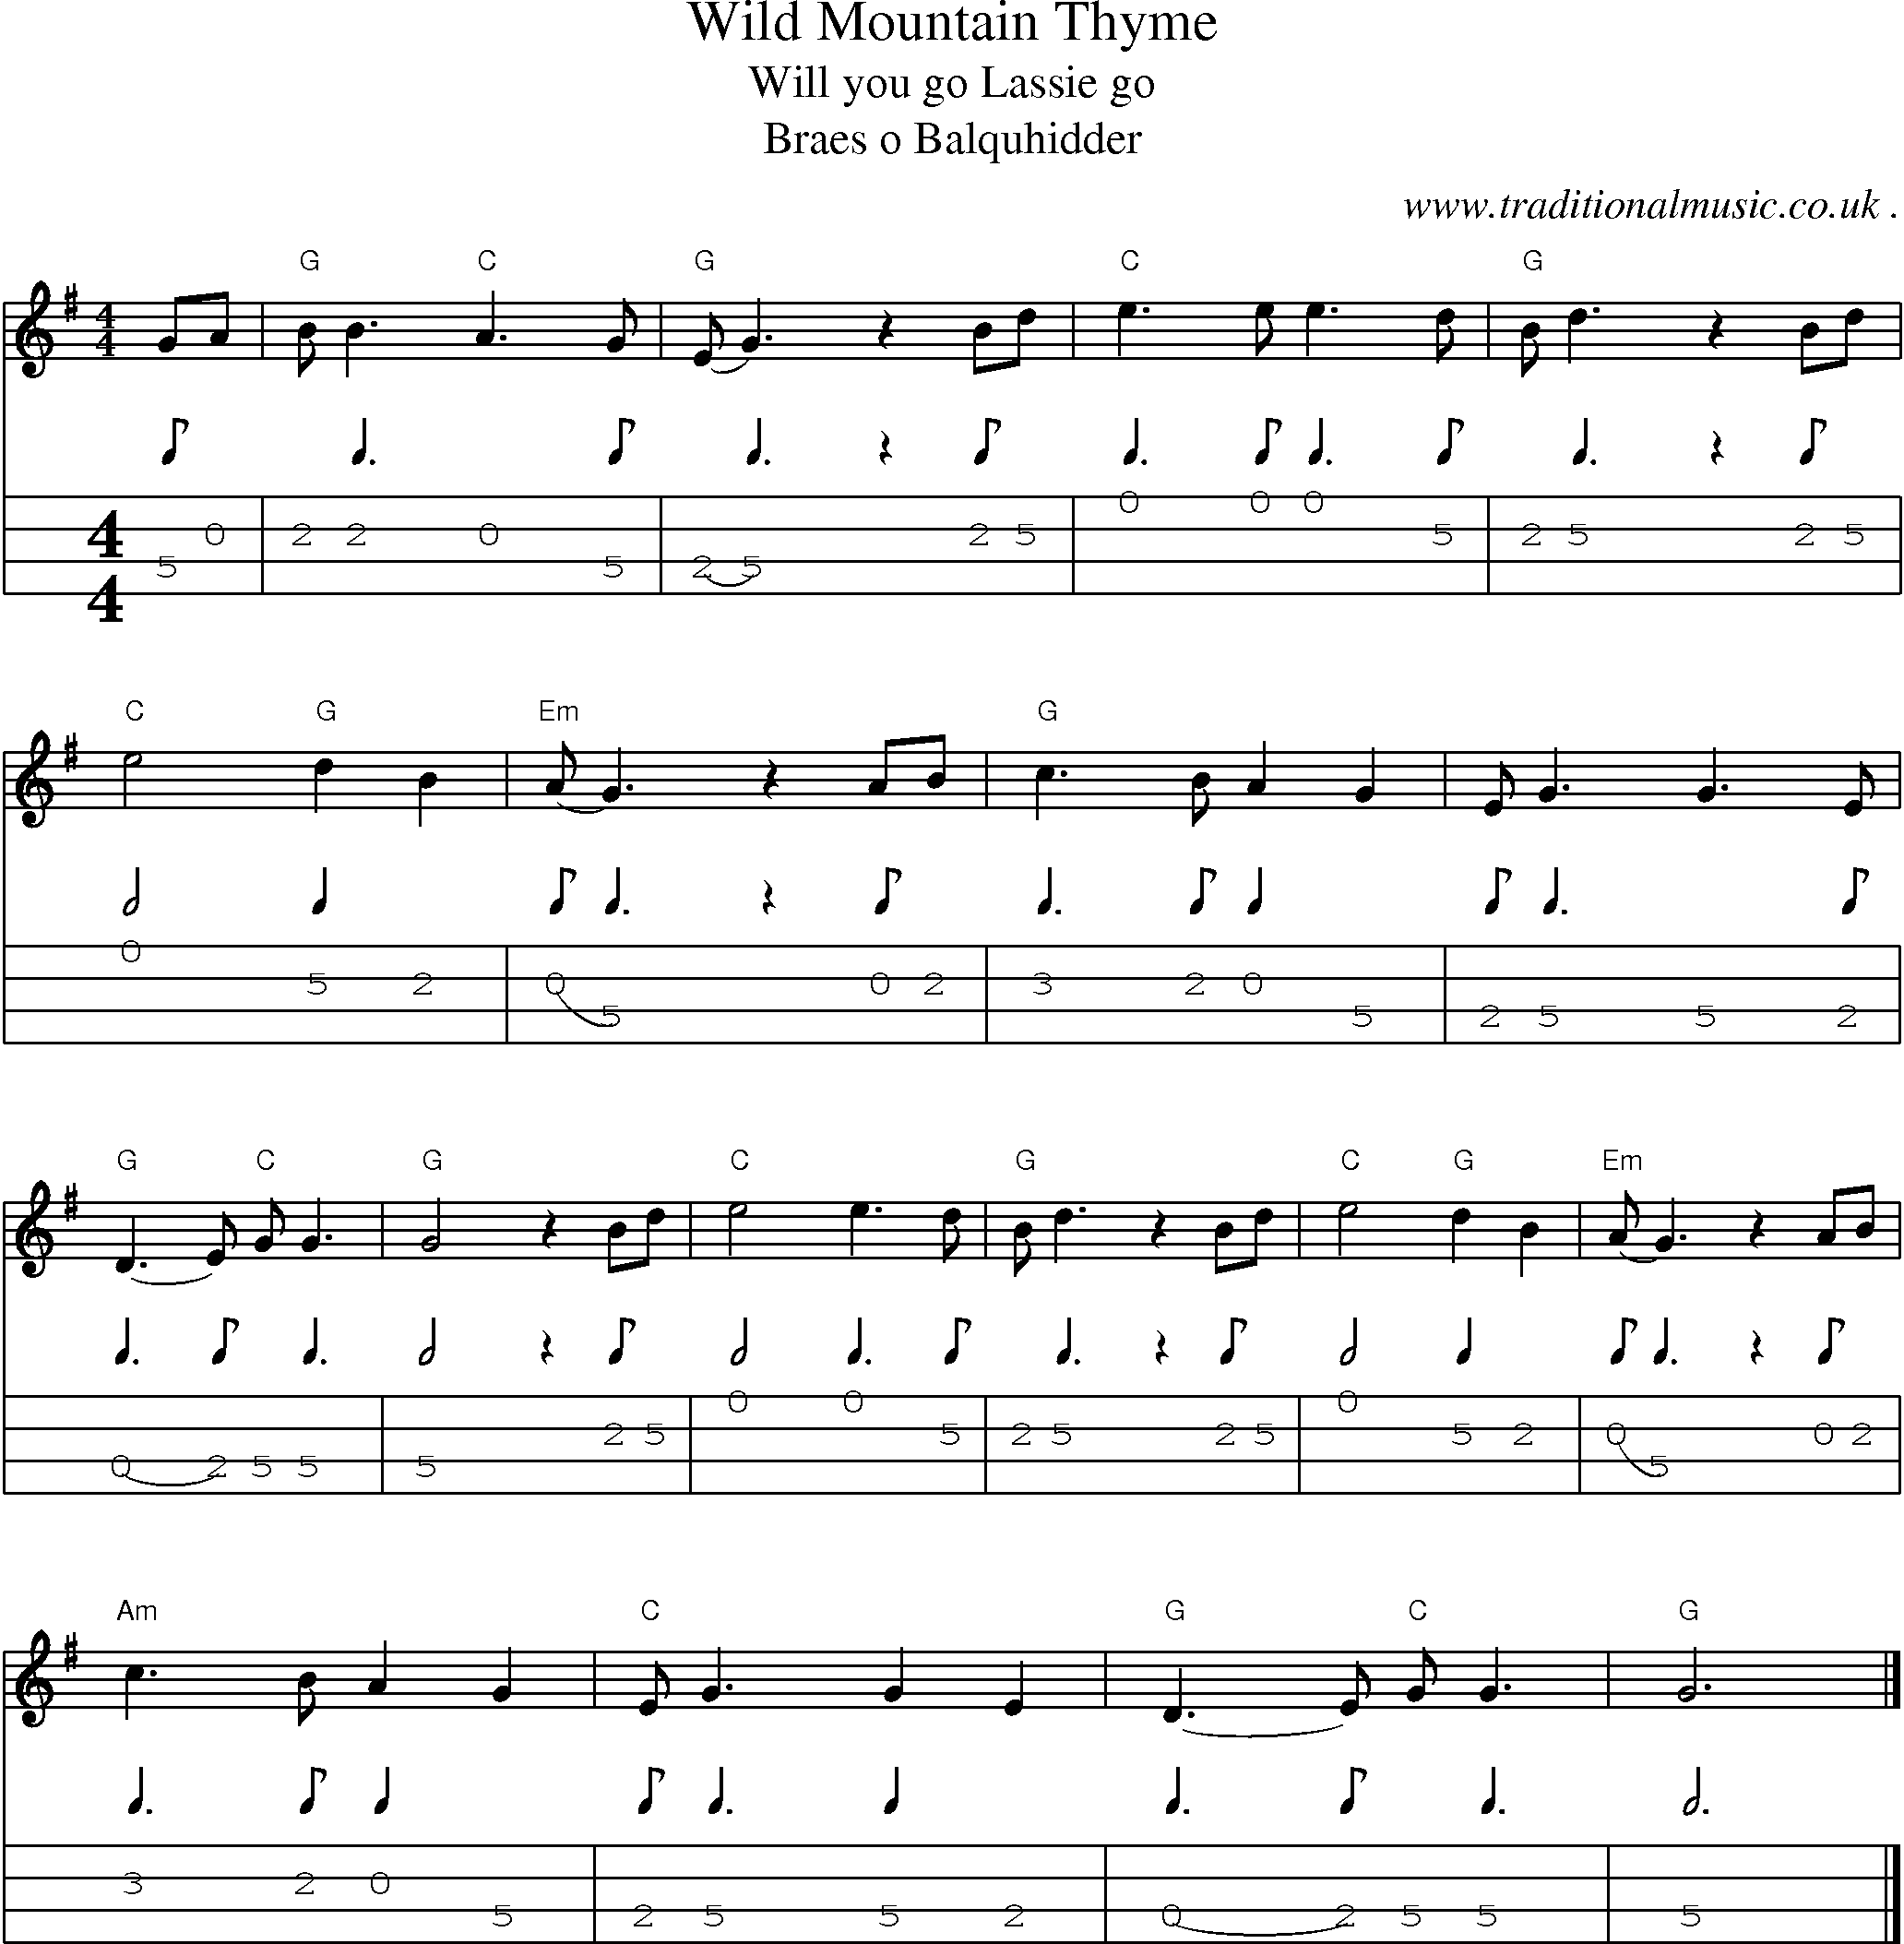 Music Score and Guitar Tabs for Wild Mountain Thyme